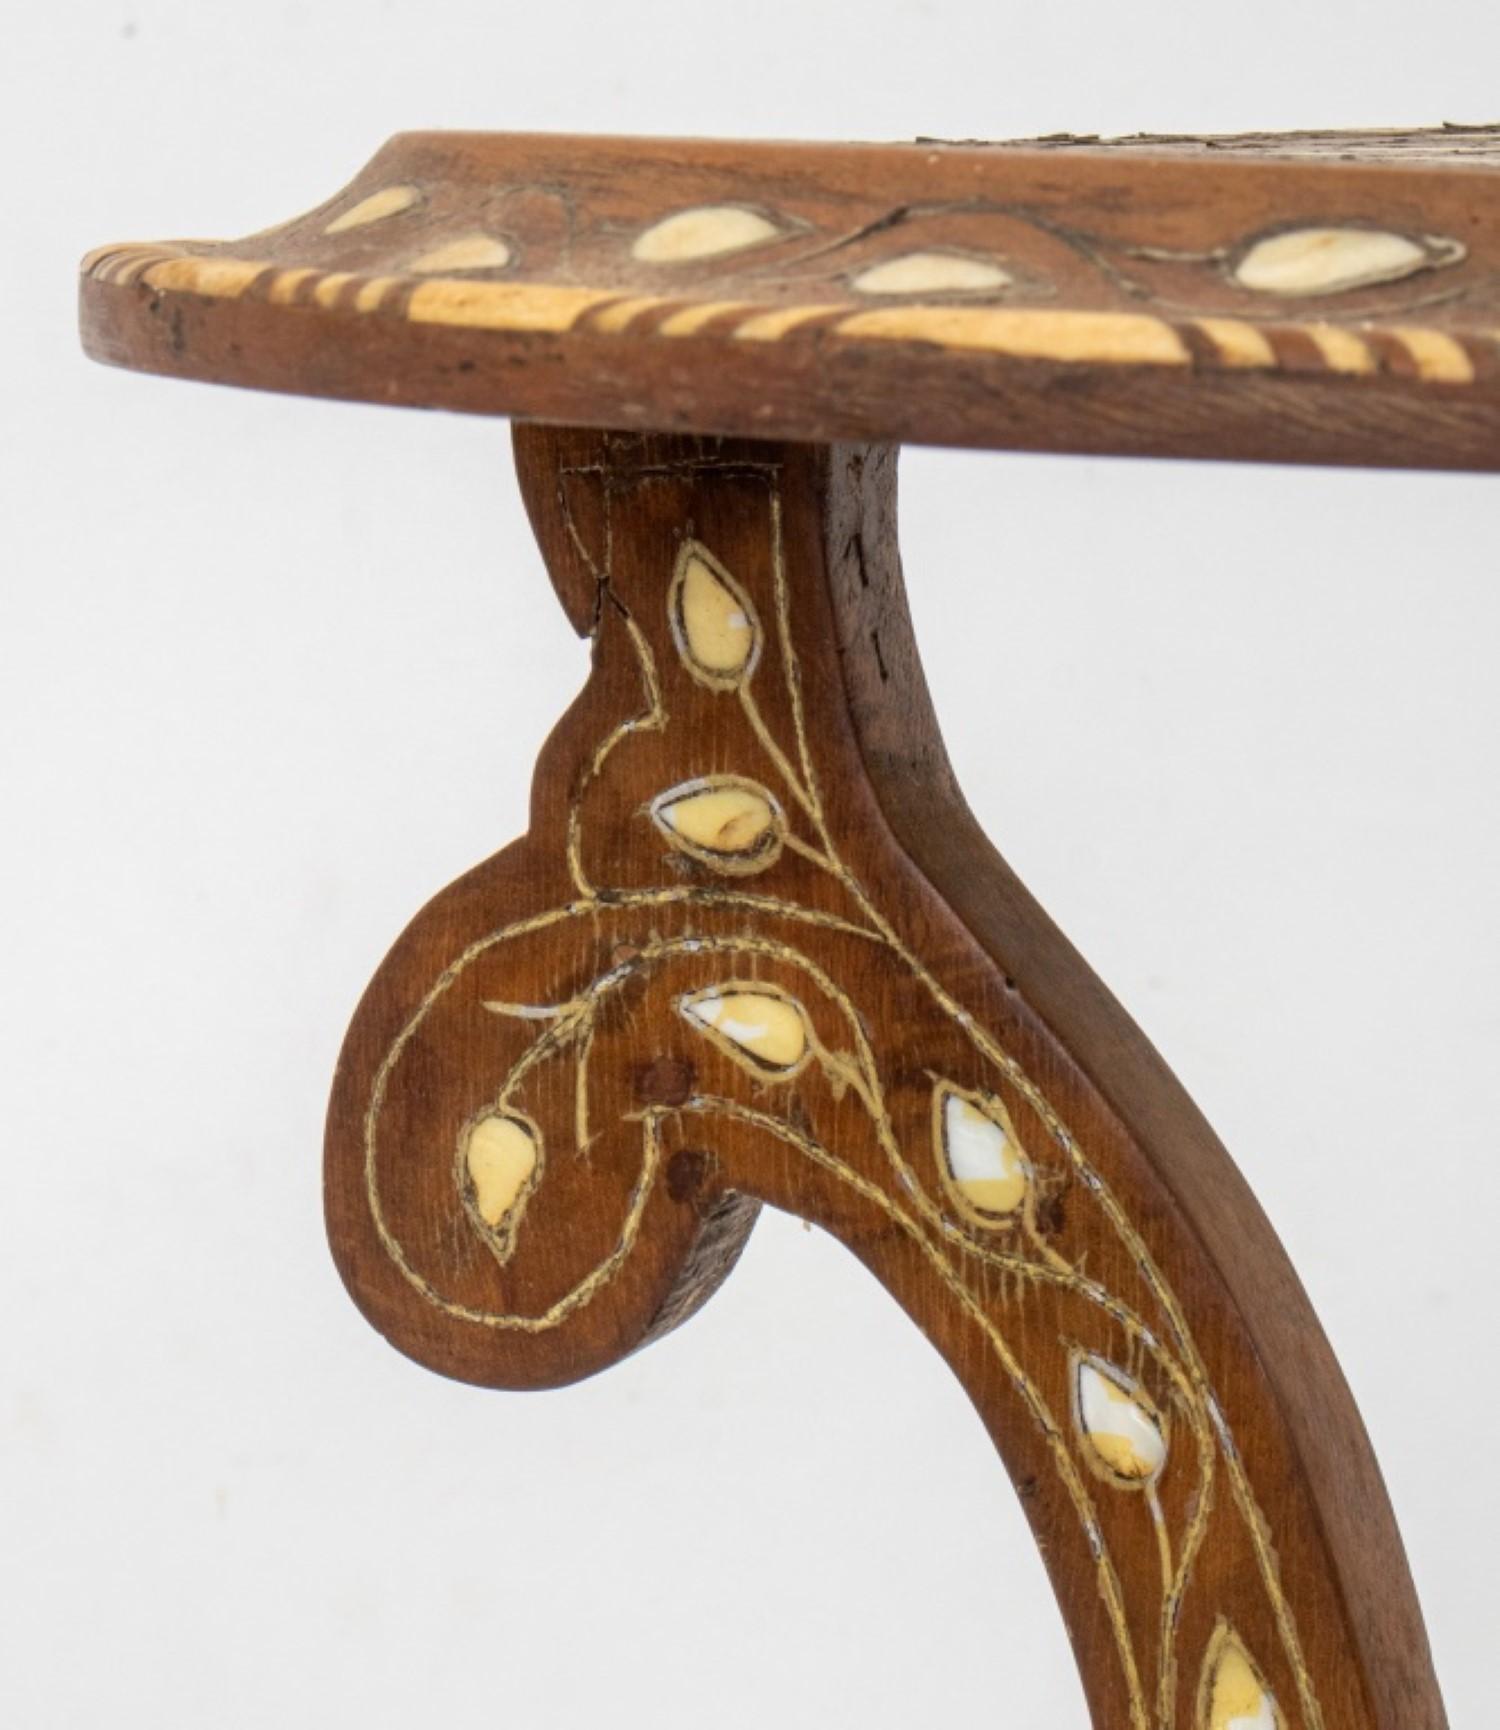 
The dimensions for the Anglo-Indian Bone Inlaid Occasional Table, with a circular top on shaped volute legs conjoined by a finial, allover inlaid with bone in floral patterns, are approximately:

Height: 27.5 inches
Diameter: 17 inches



